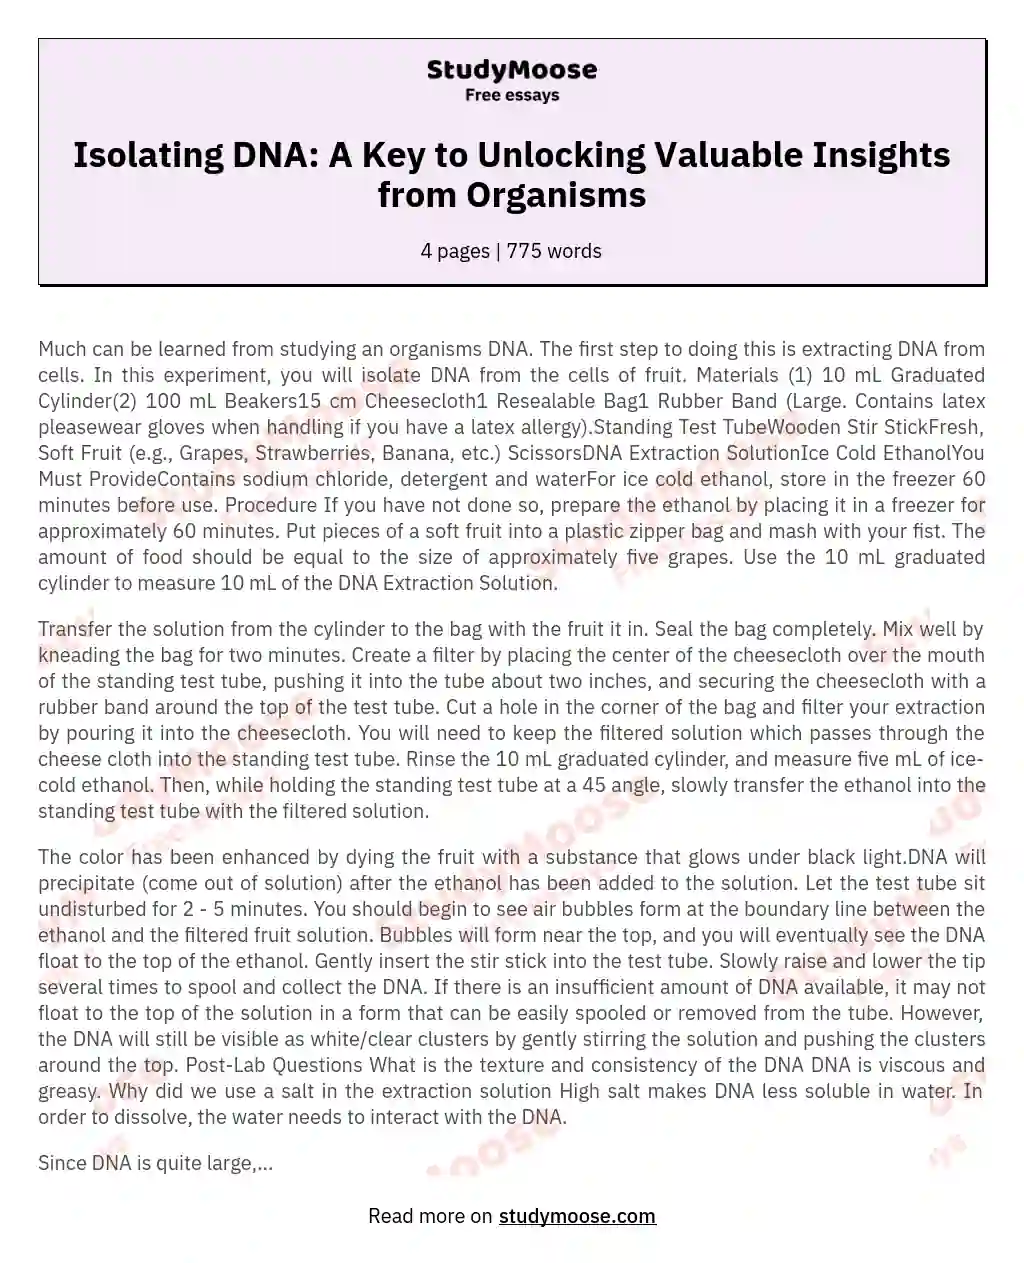 Isolating DNA: A Key to Unlocking Valuable Insights from Organisms essay